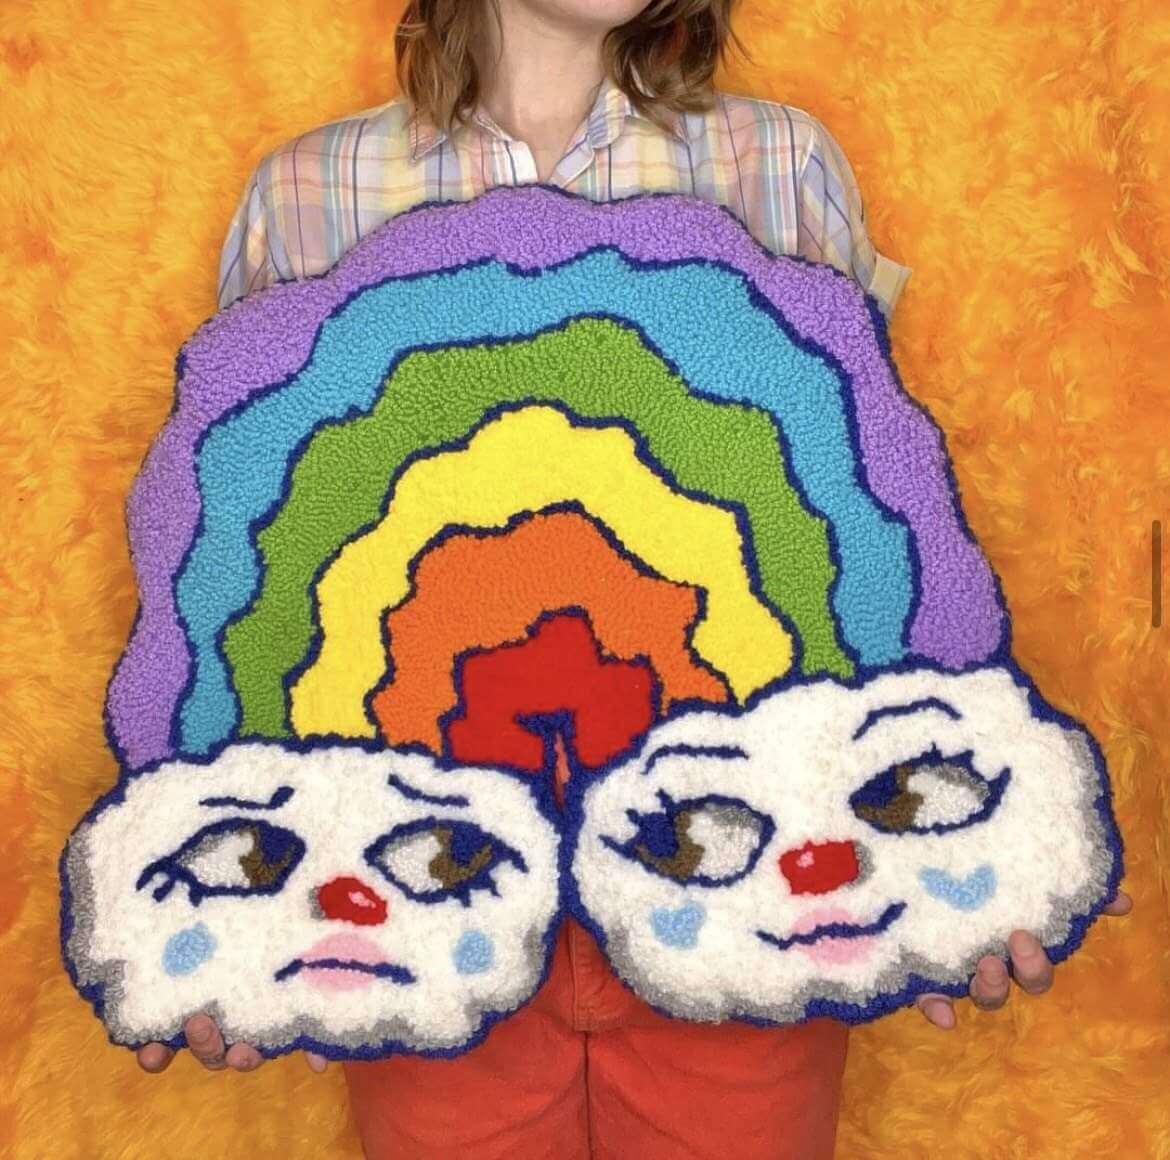 Artist holding a photo resembling clouds and rainbows